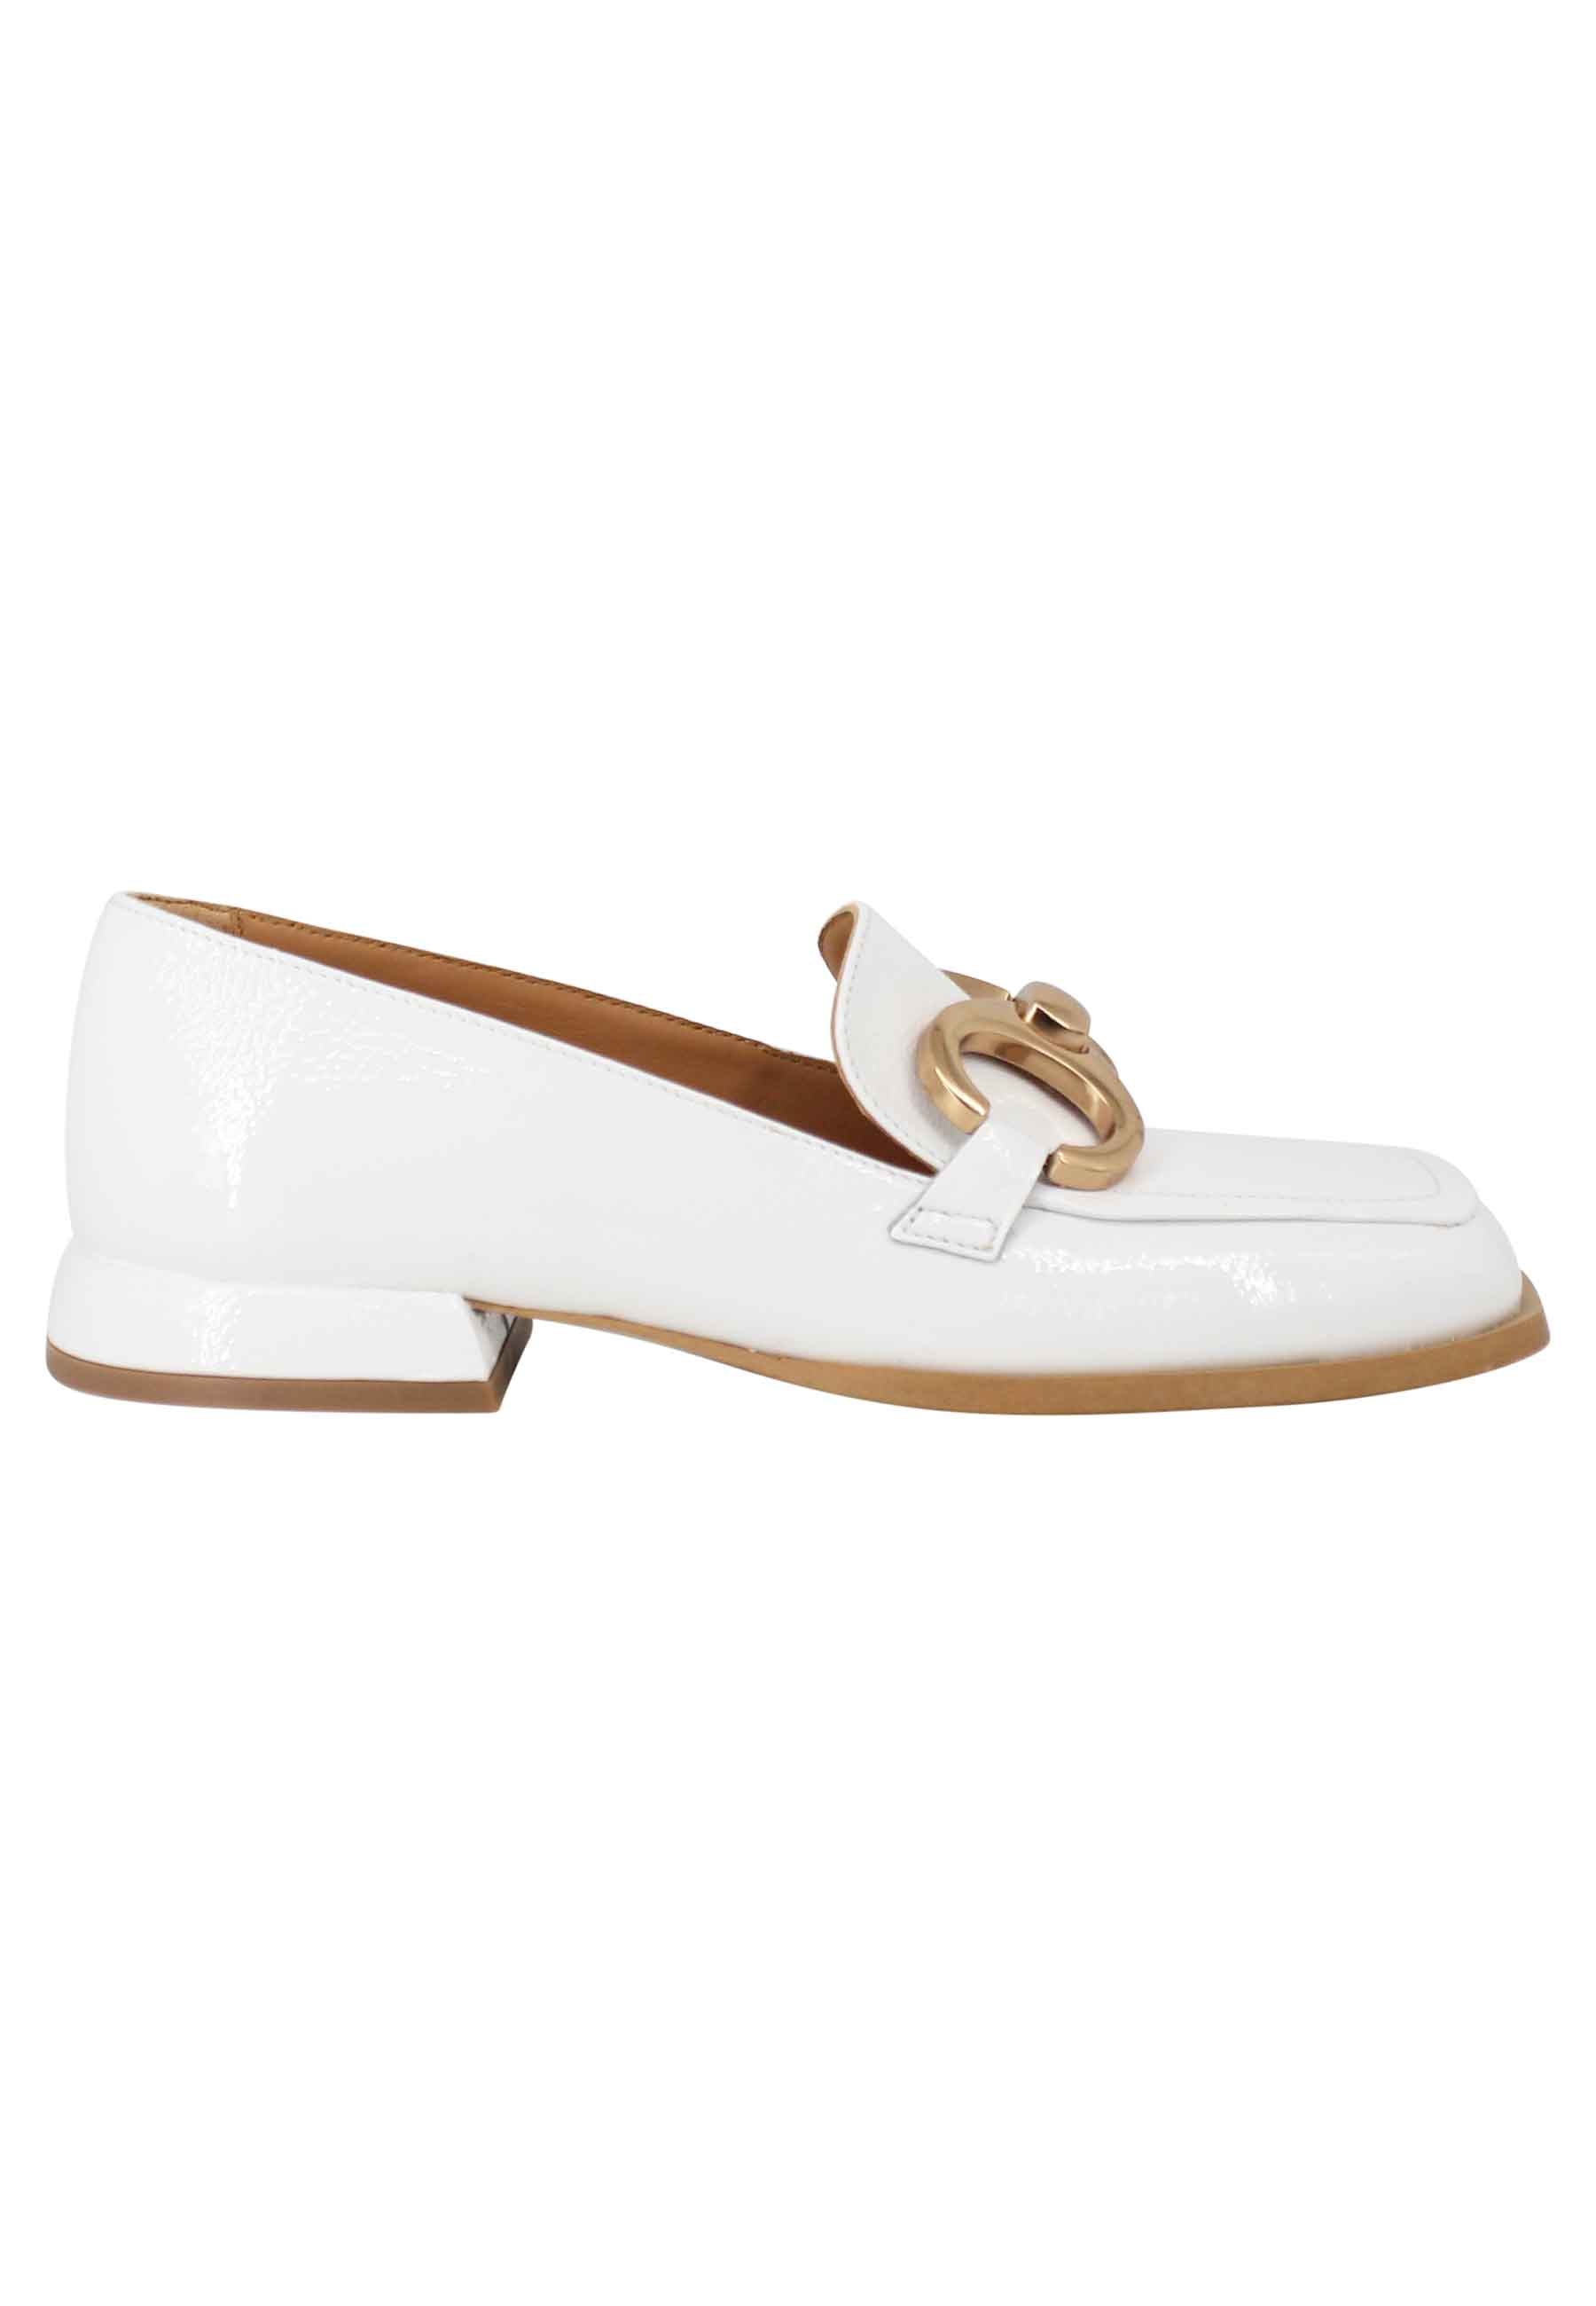 Poppi Chal women's loafers in off white naplak with satin gold clamp